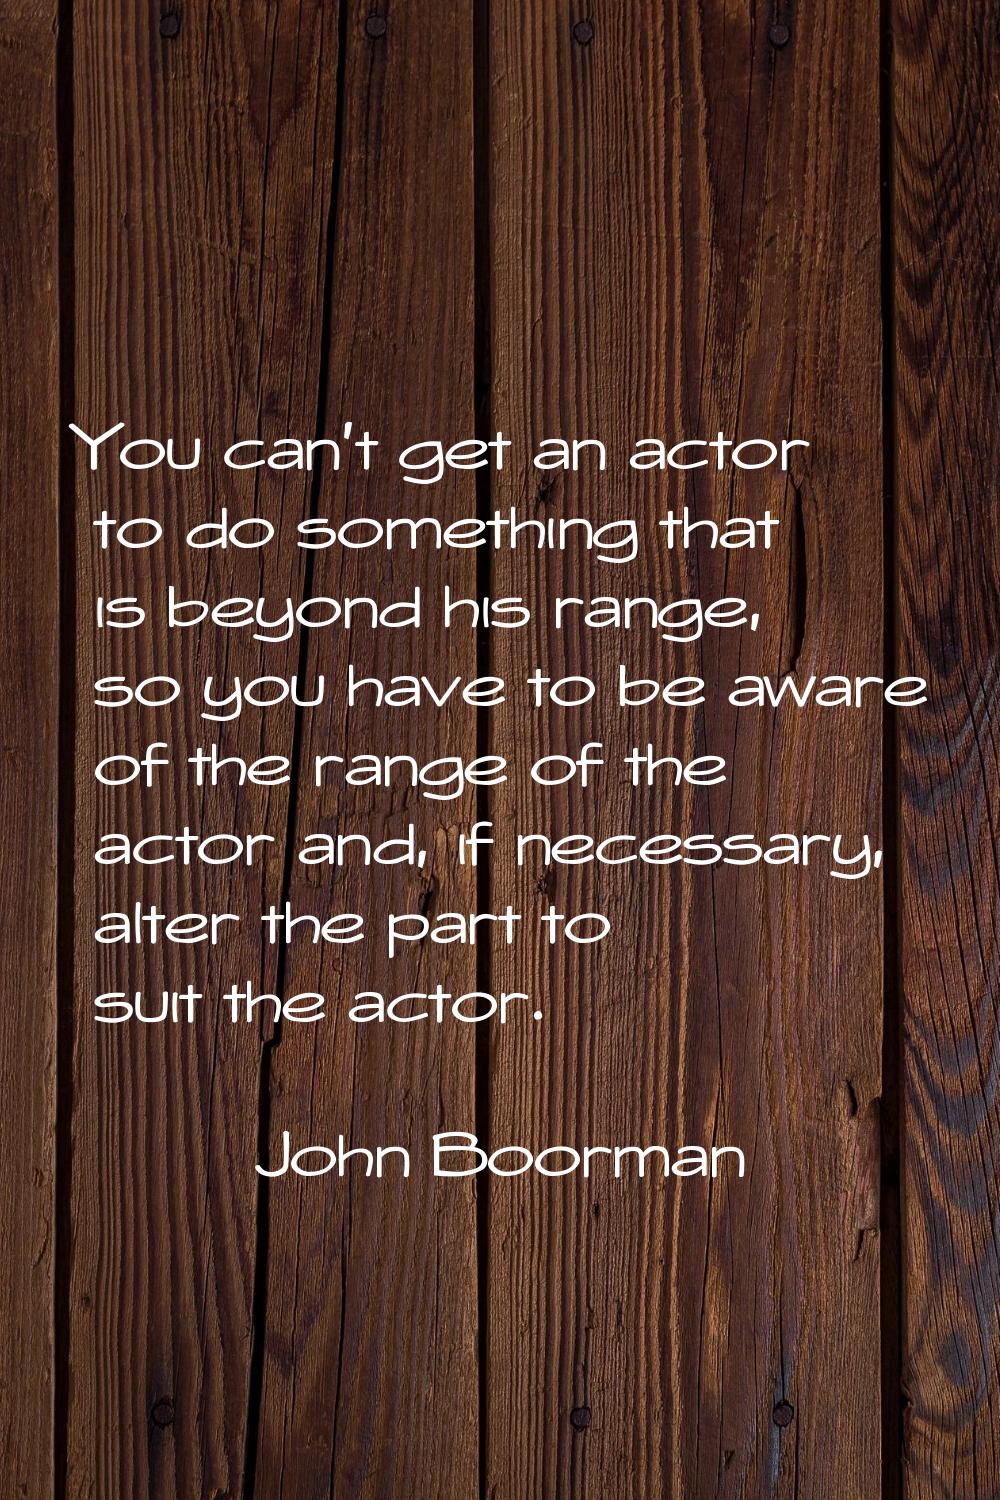 You can't get an actor to do something that is beyond his range, so you have to be aware of the ran